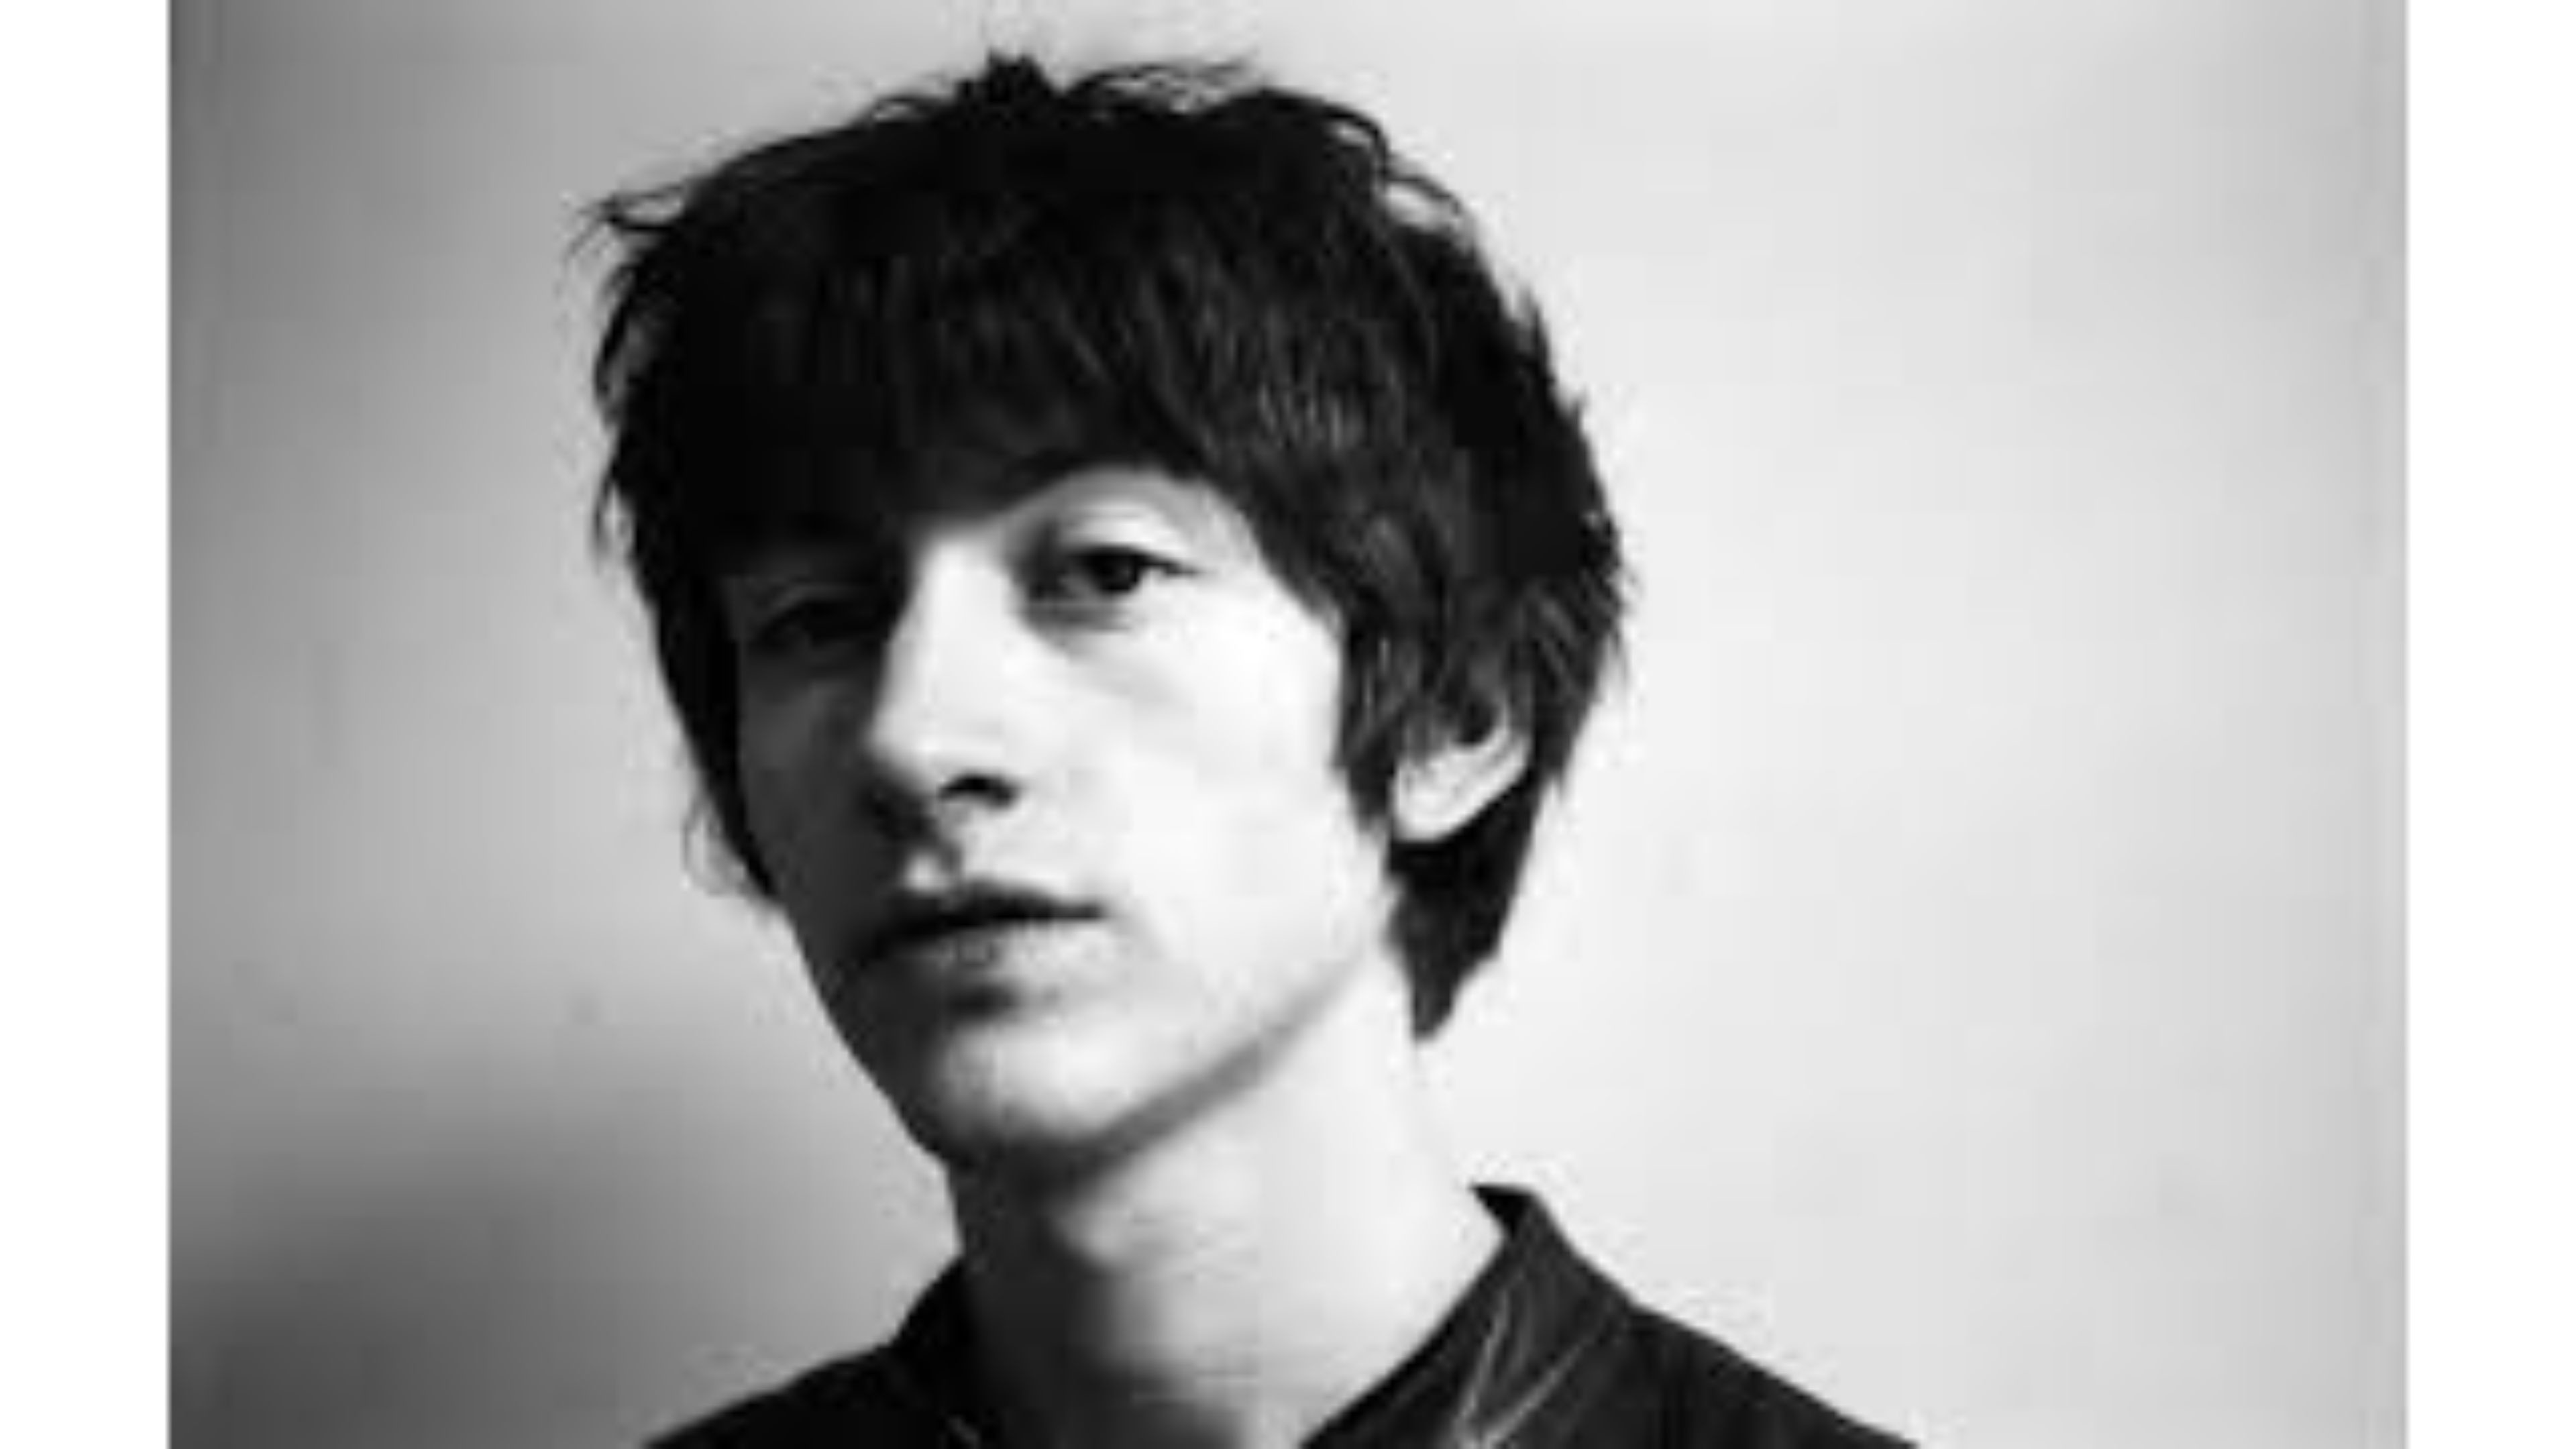 Alex Turner Wallpapers Wallpapertag Images, Photos, Reviews